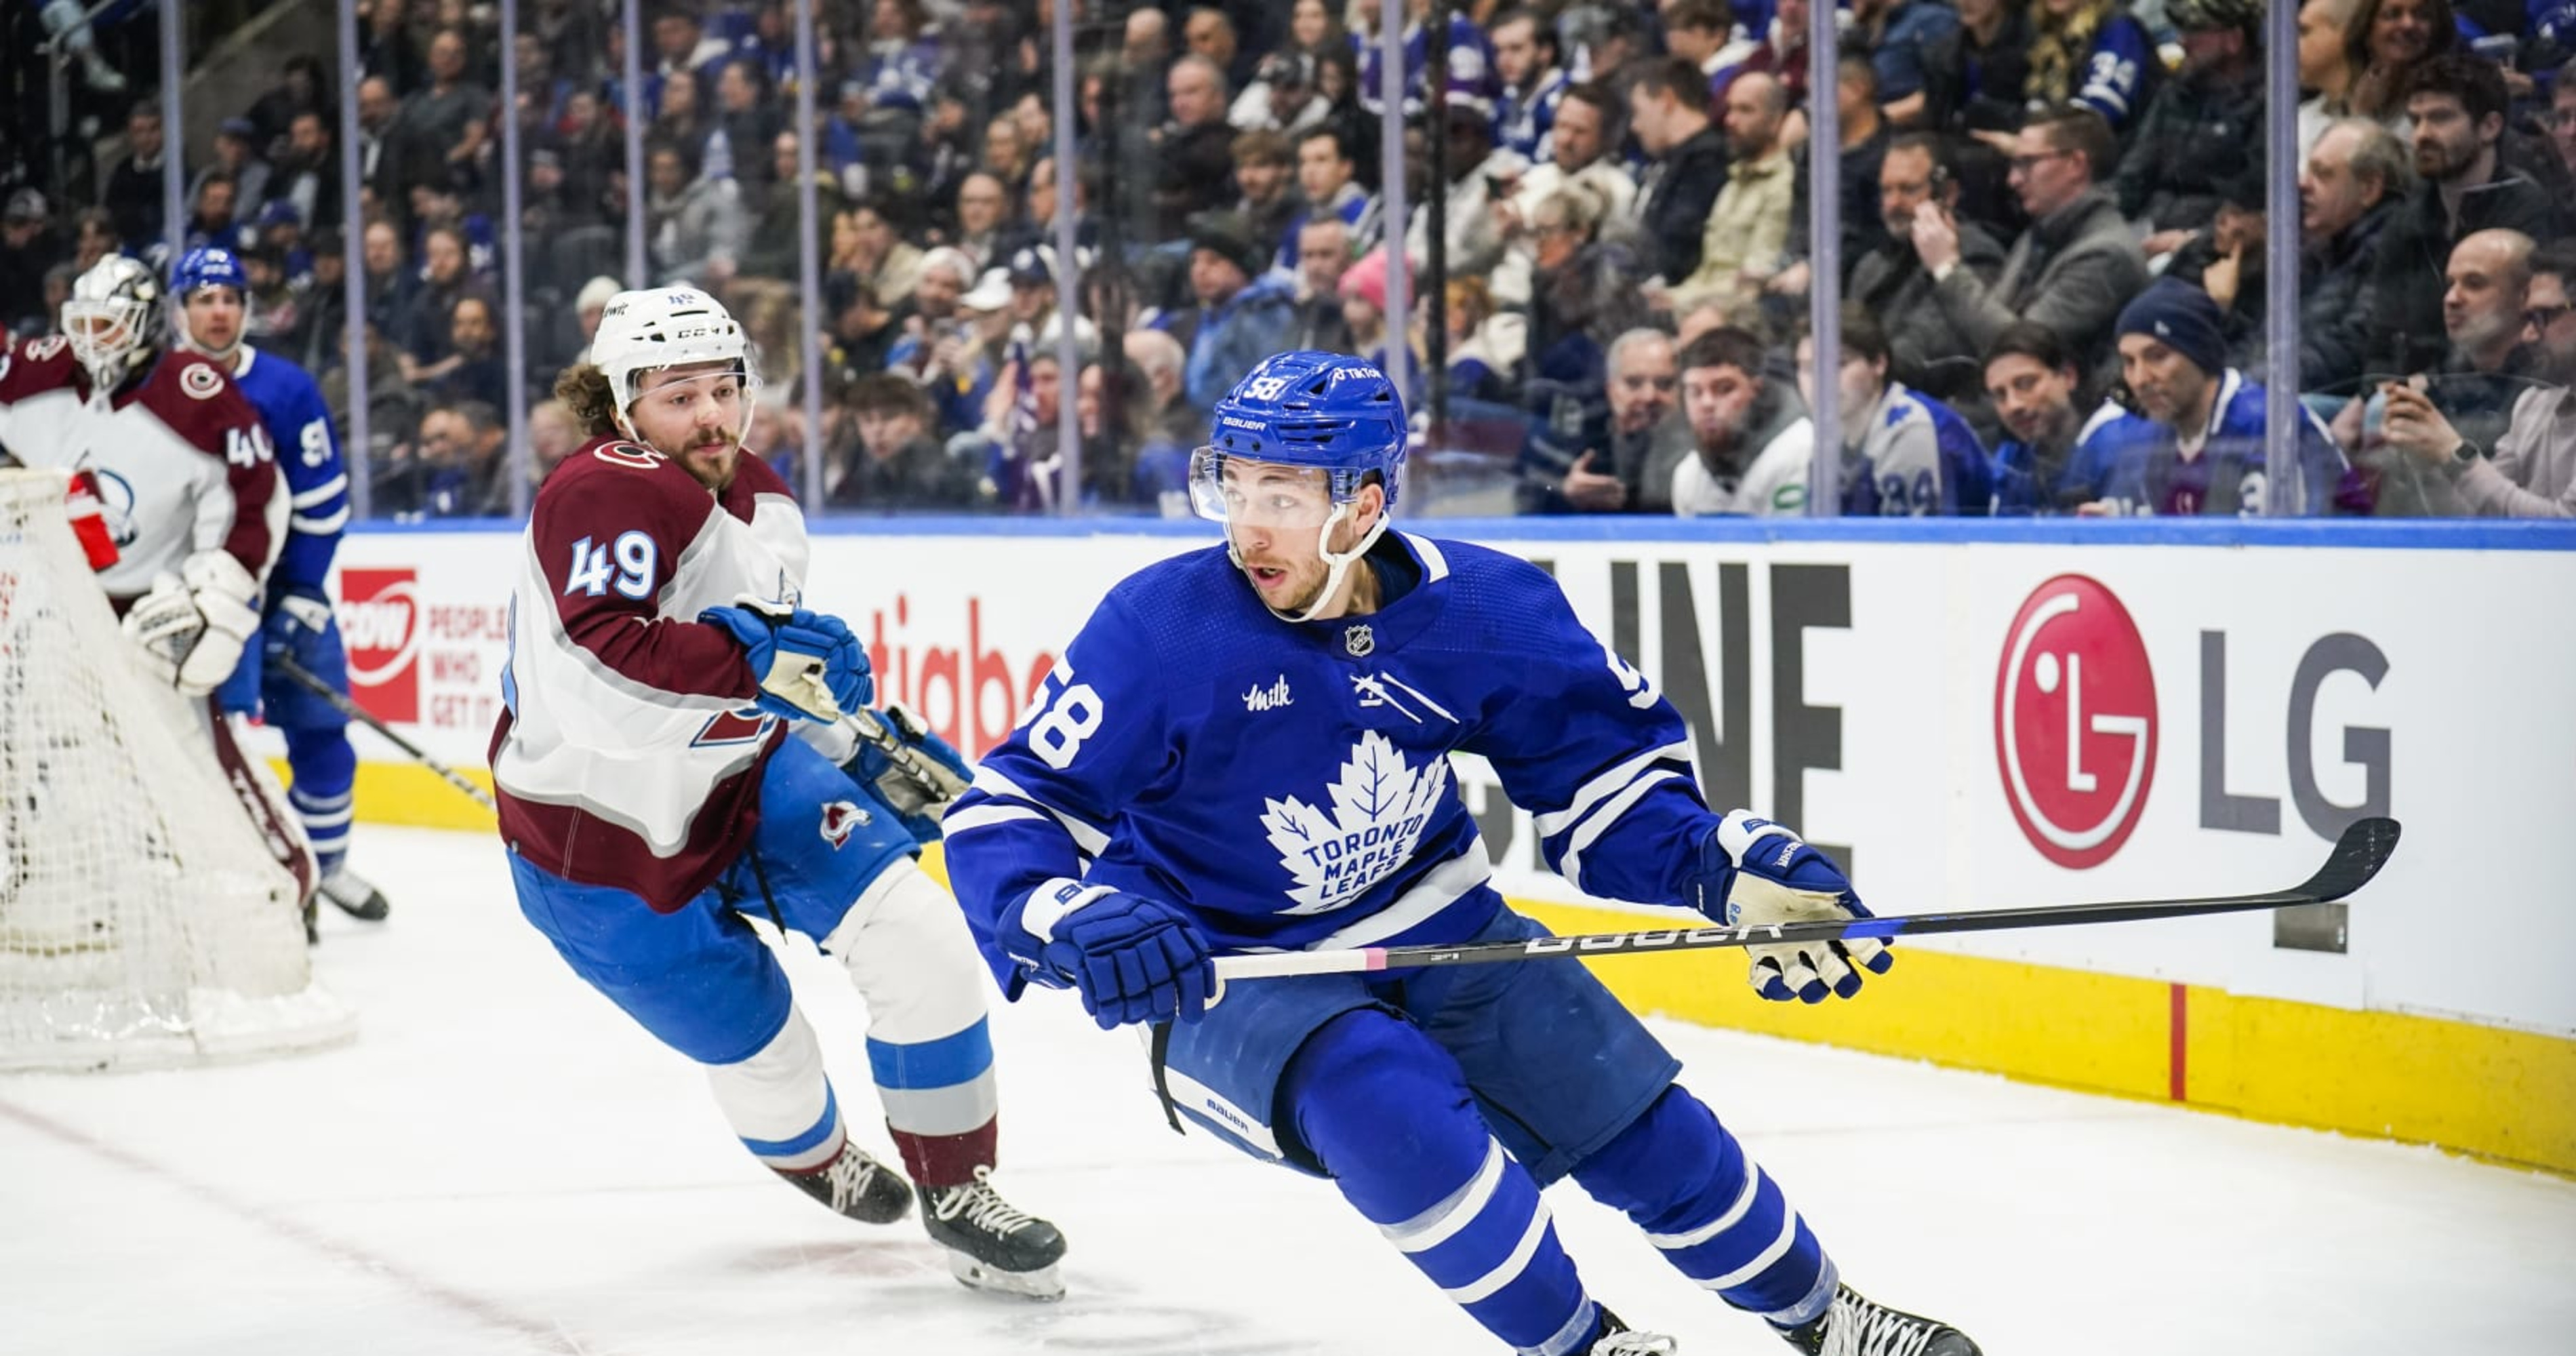 NHL: 4 paths Maple Leafs can take after rough start to season